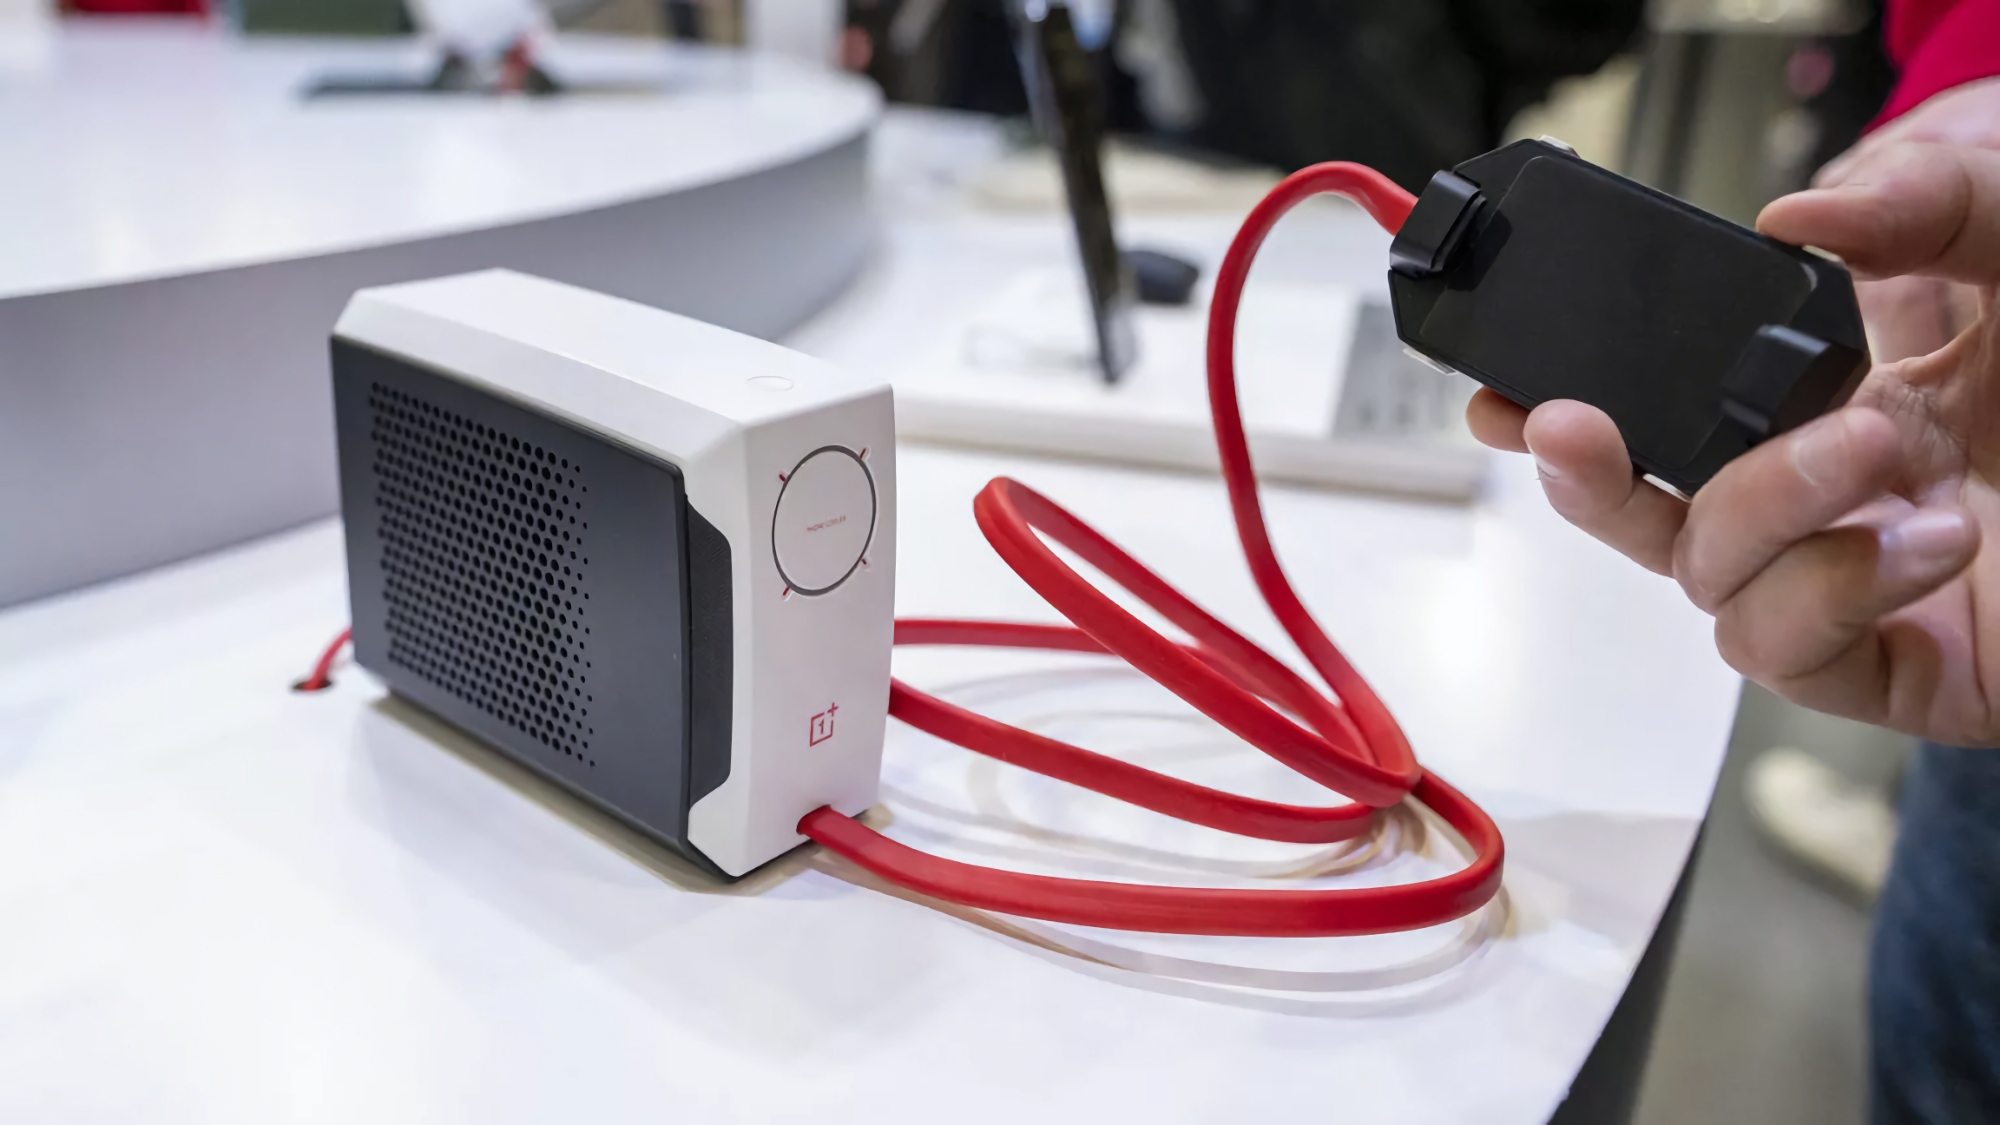 OnePlus has introduced the OnePlus 45W Liquid Cooler: an accessory that reduces smartphone temperatures by 20°C